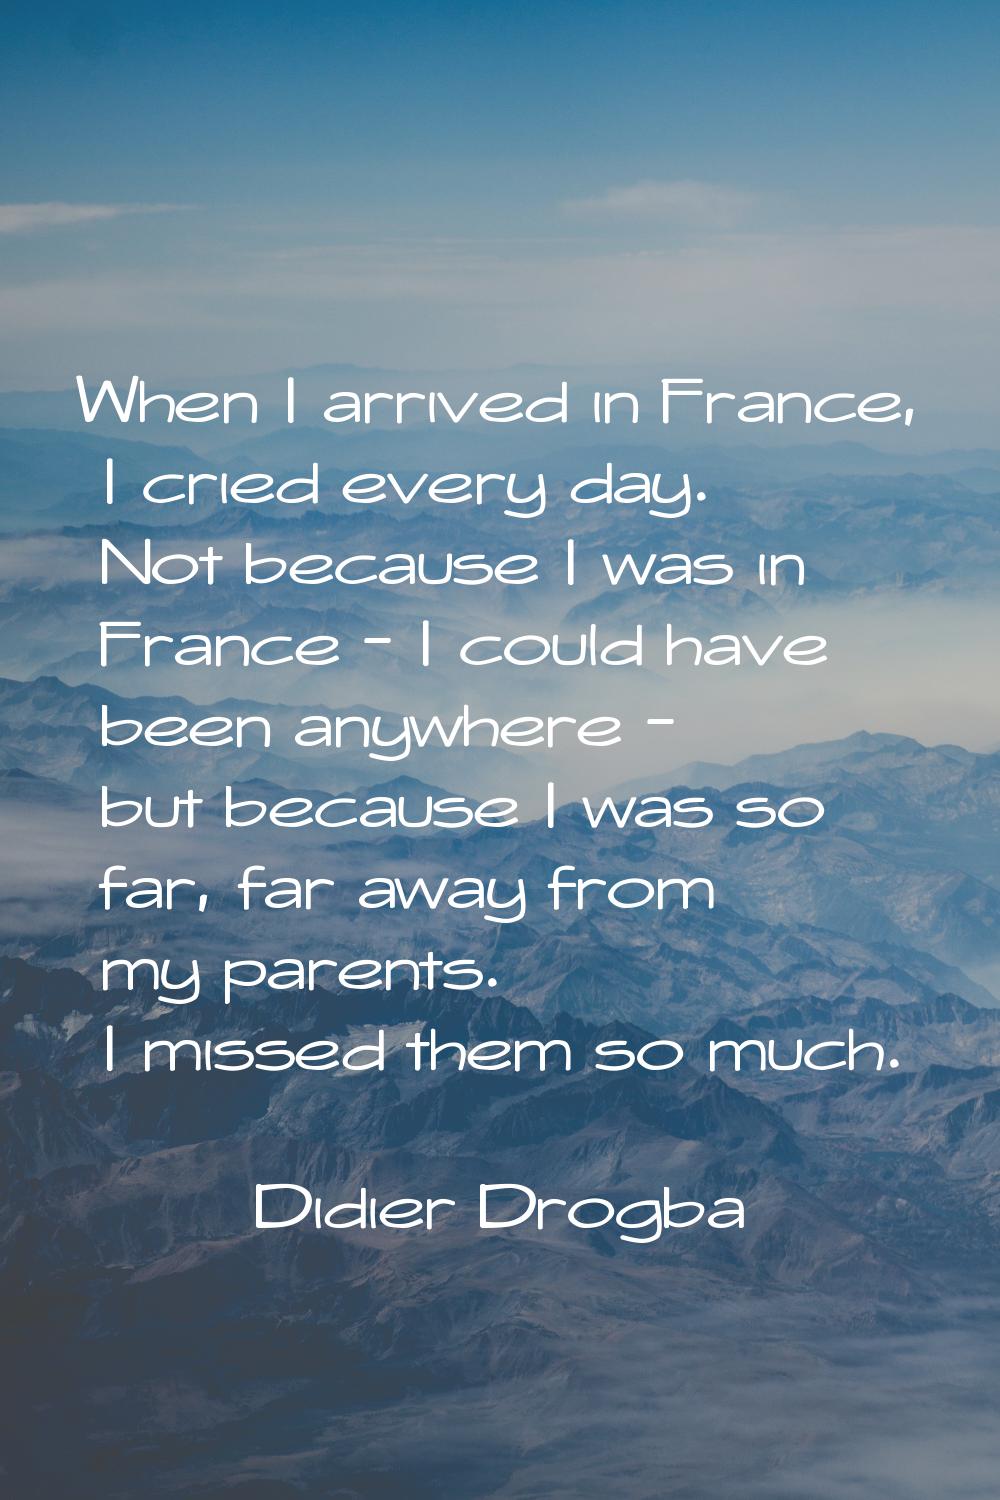 When I arrived in France, I cried every day. Not because I was in France - I could have been anywhe